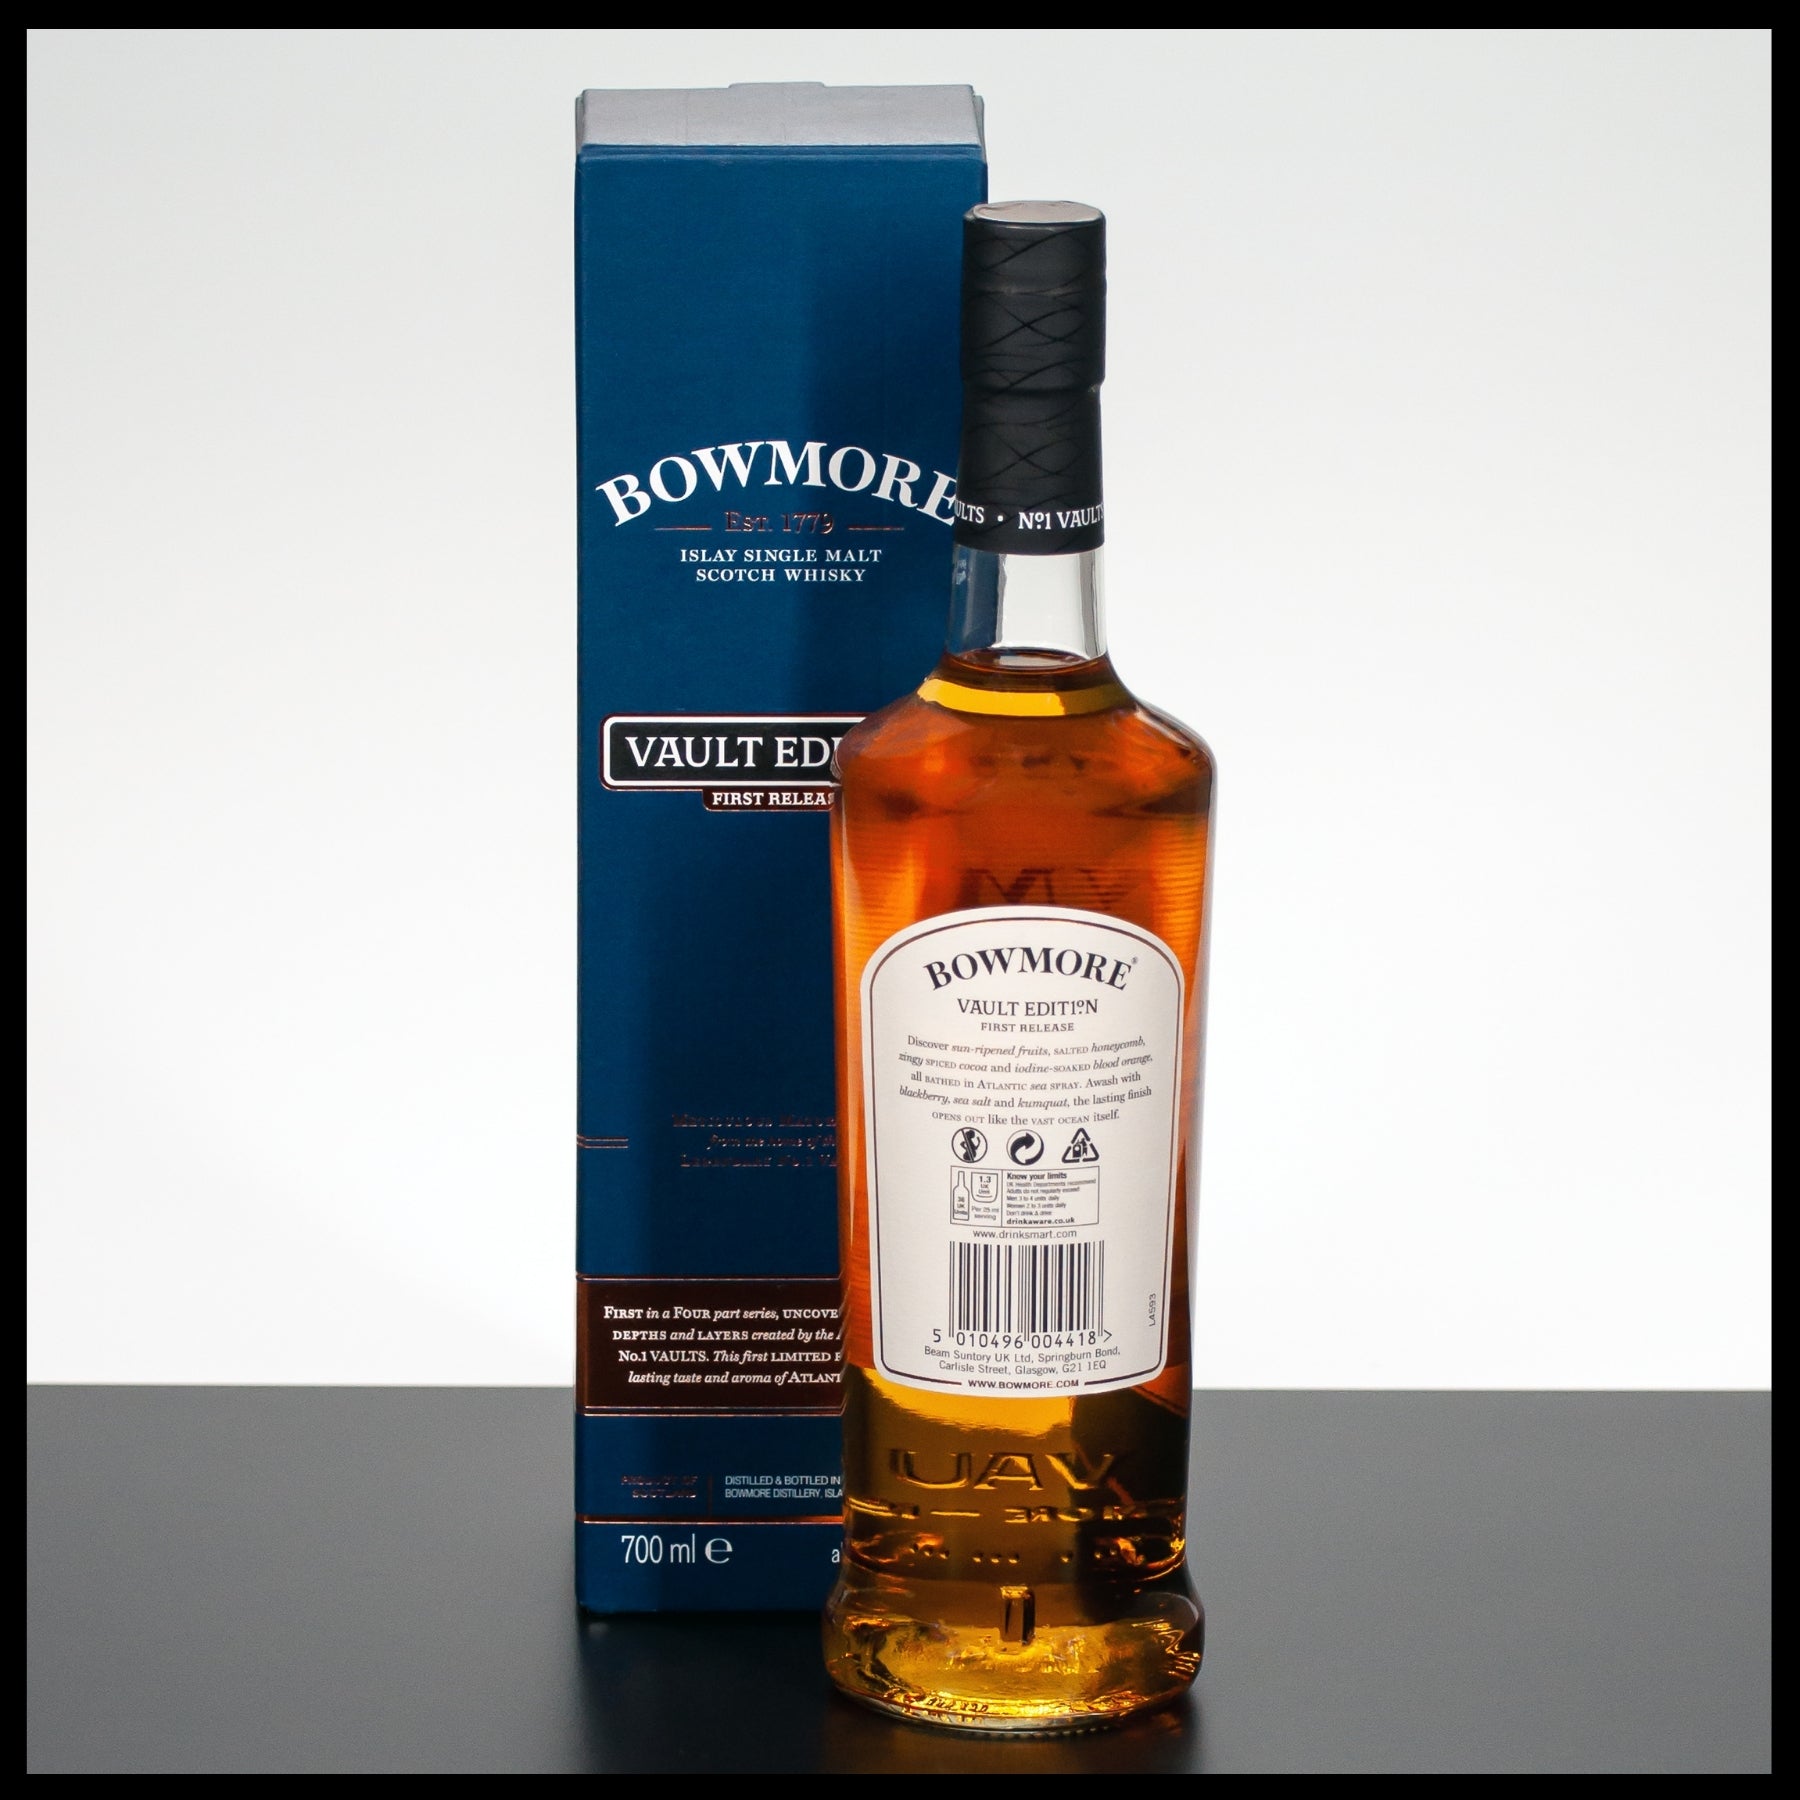 Bowmore Vault Edition First Release Trinklusiv | 0,7L - 51,5